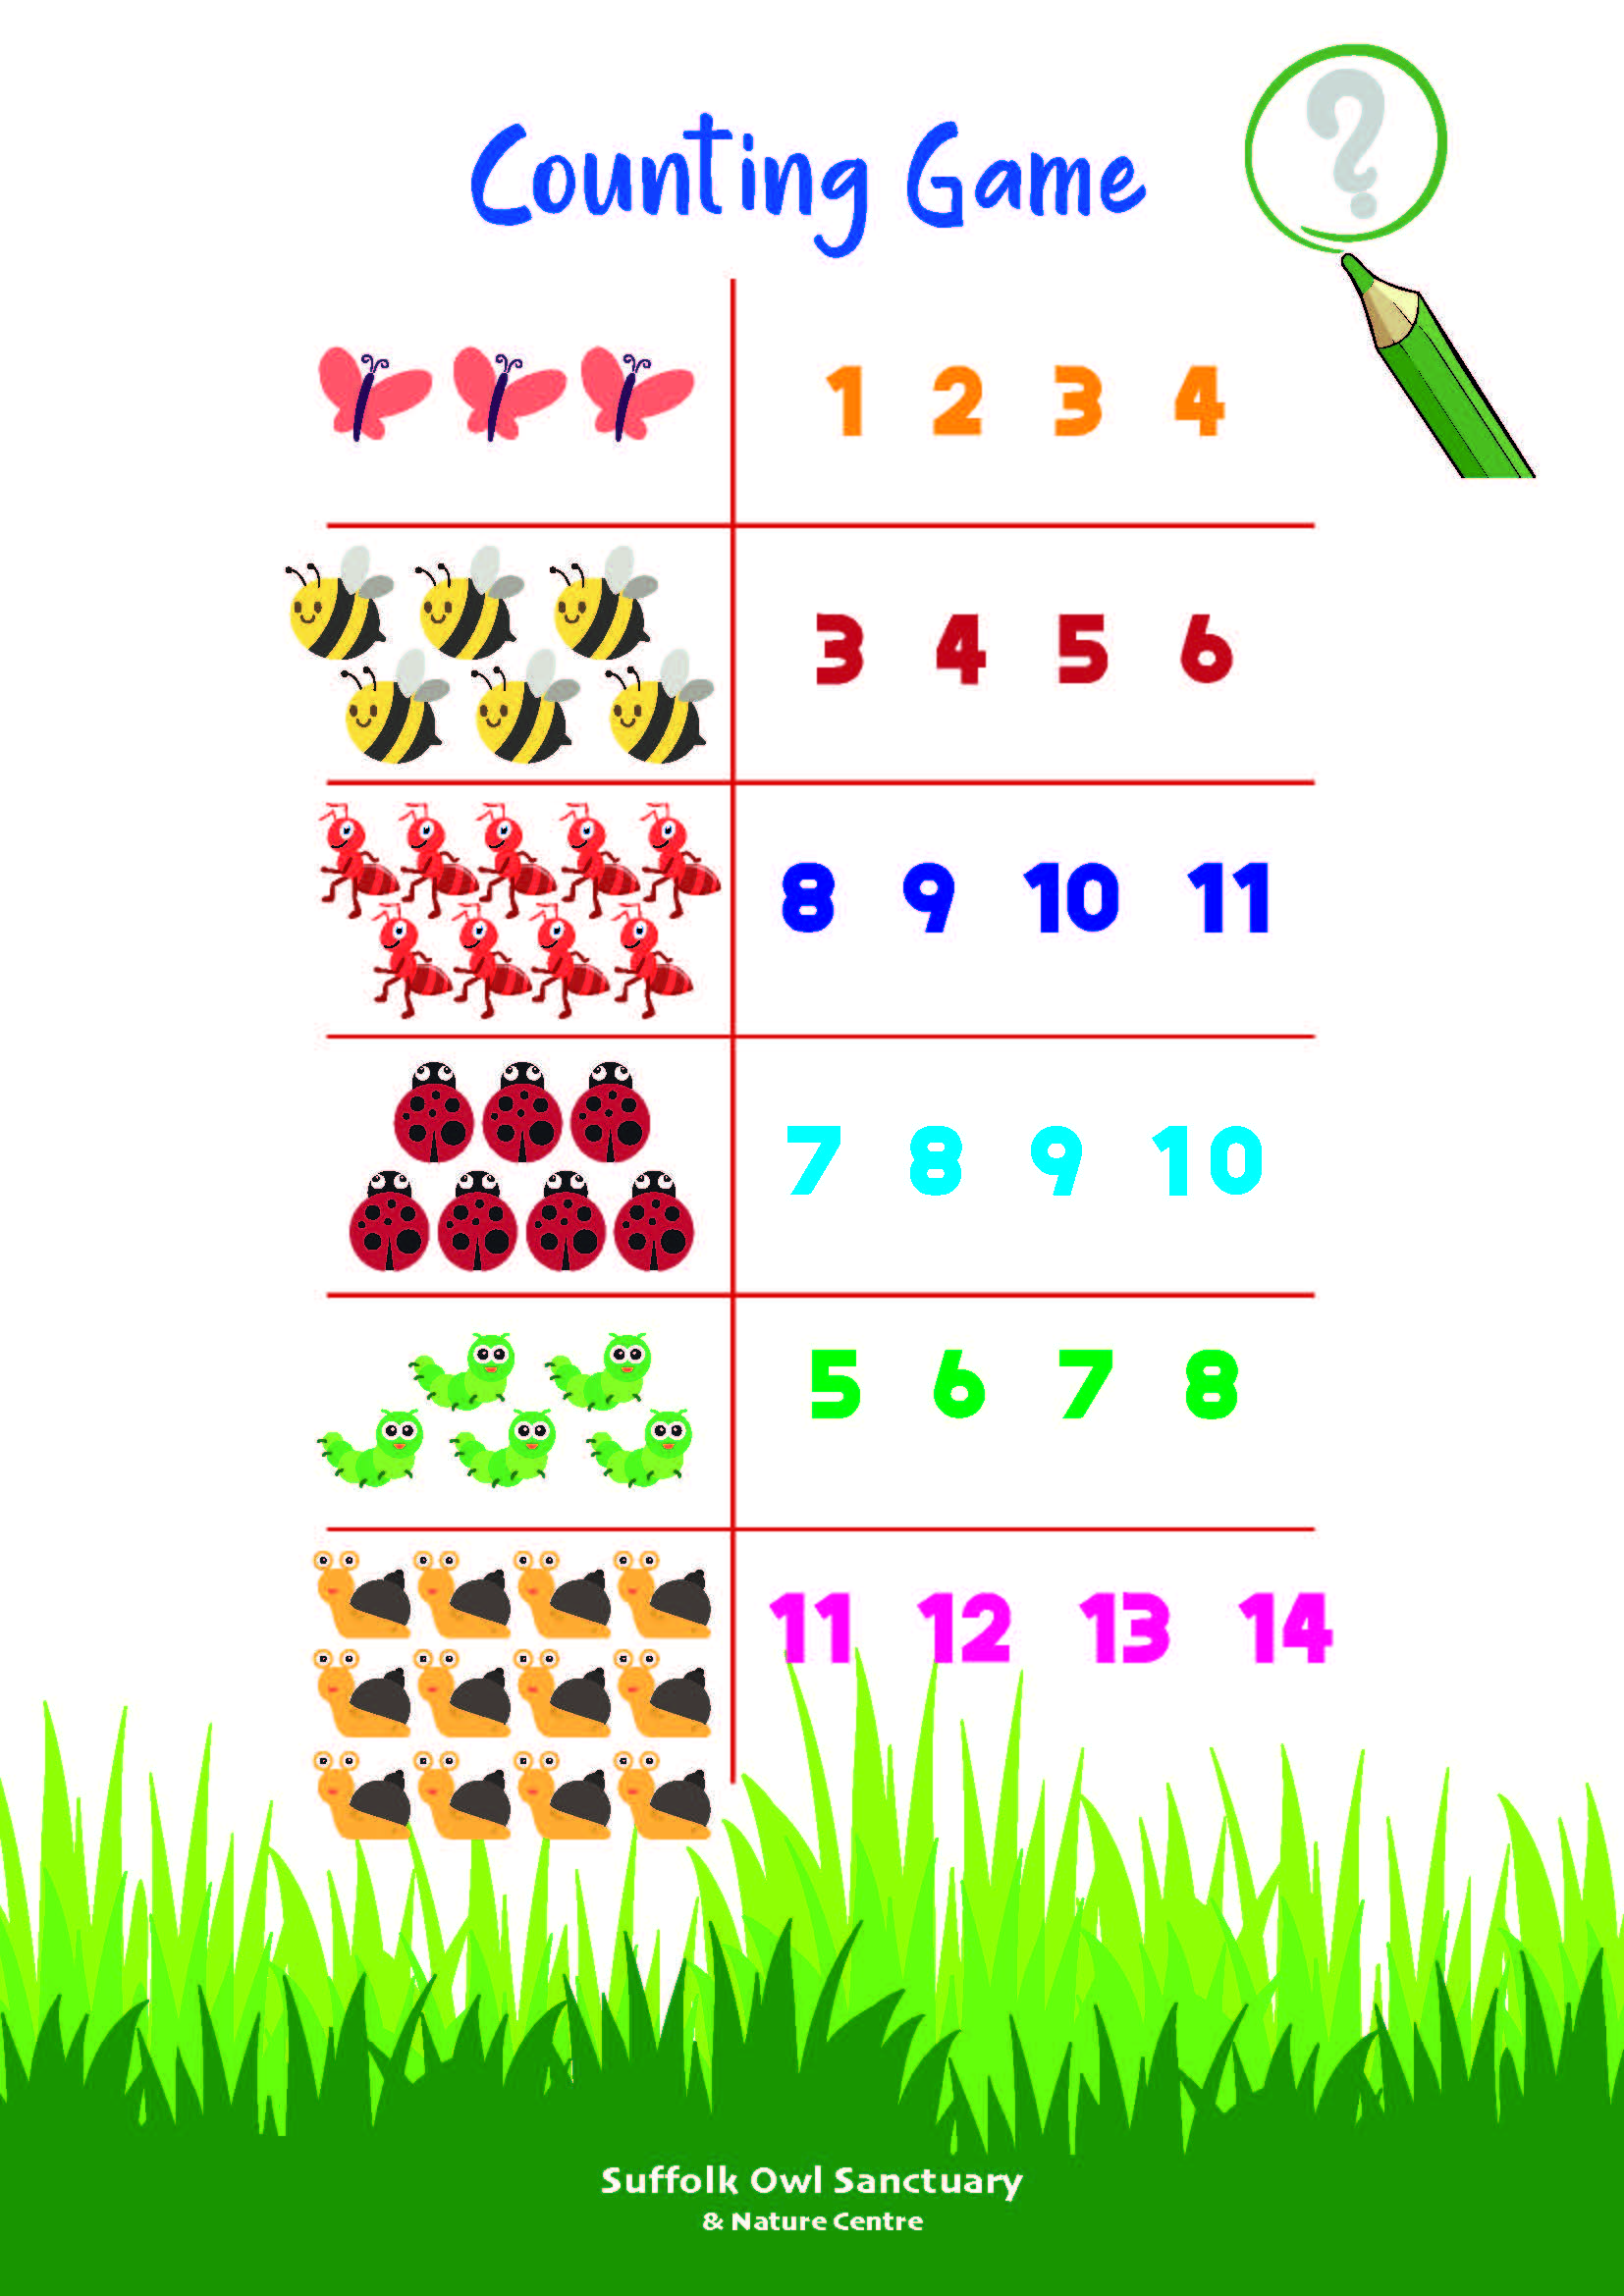 Counting Game Activity Sheet  image